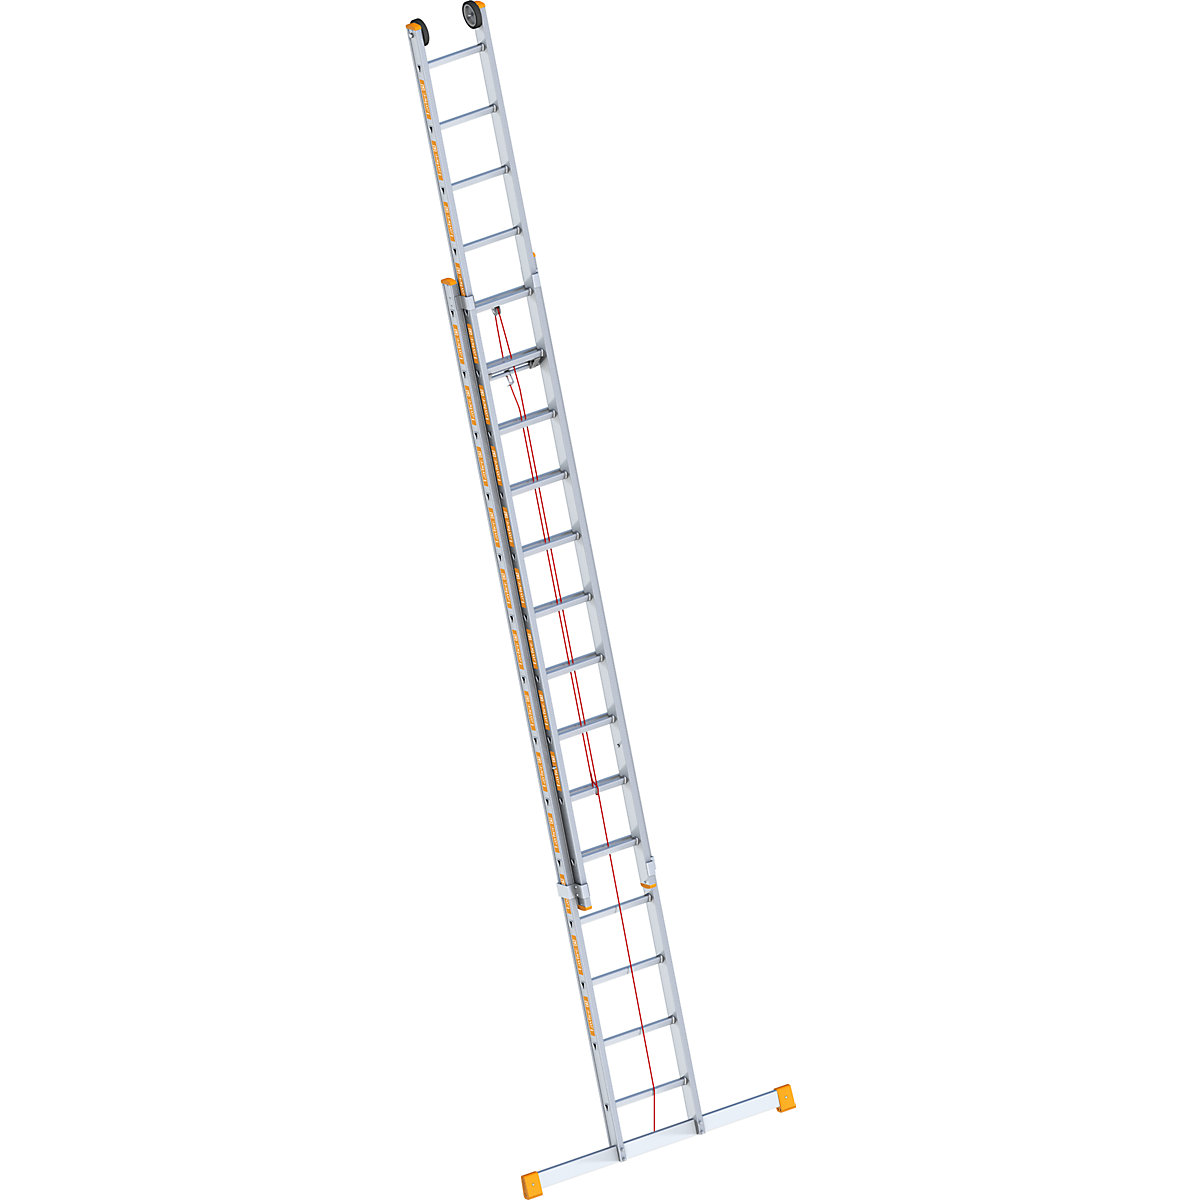 Aluminium rope operated extension ladder – Layher